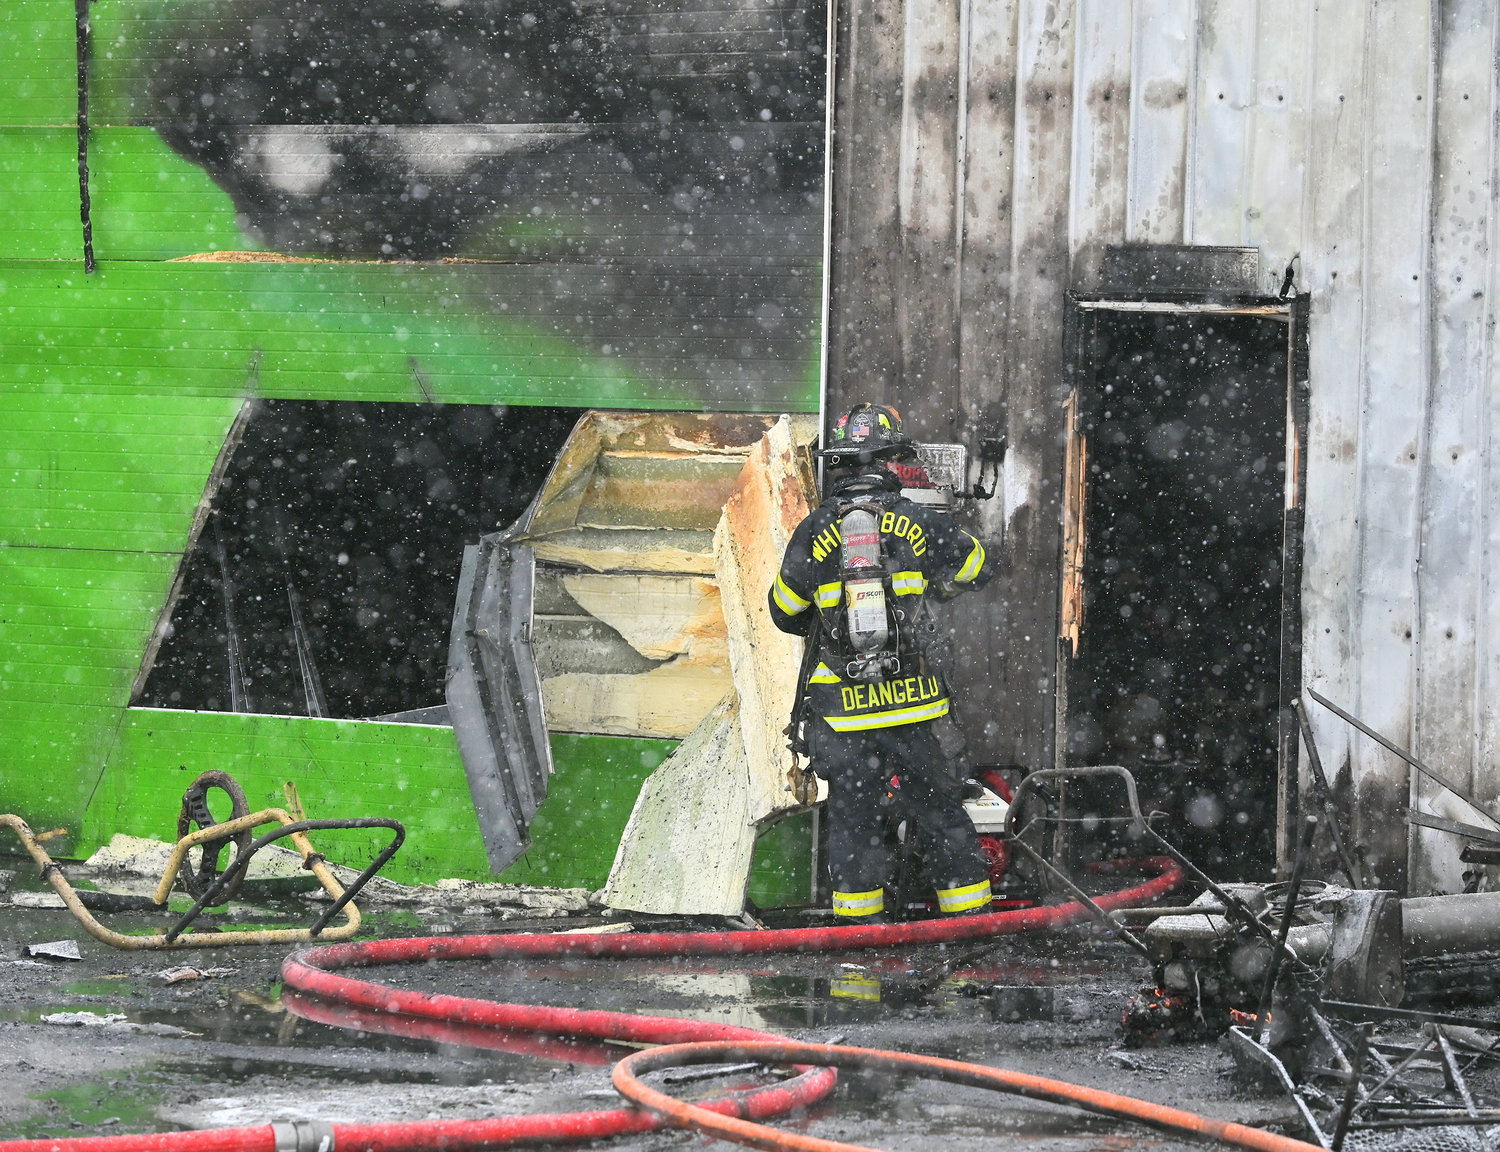 BUSINESS BURNED — A volunteer firefighter from Whitesboro checks the walls at Nick's Lawn Service on Main Street after the building was heavily damaged by a fire Tuesday afternoon.